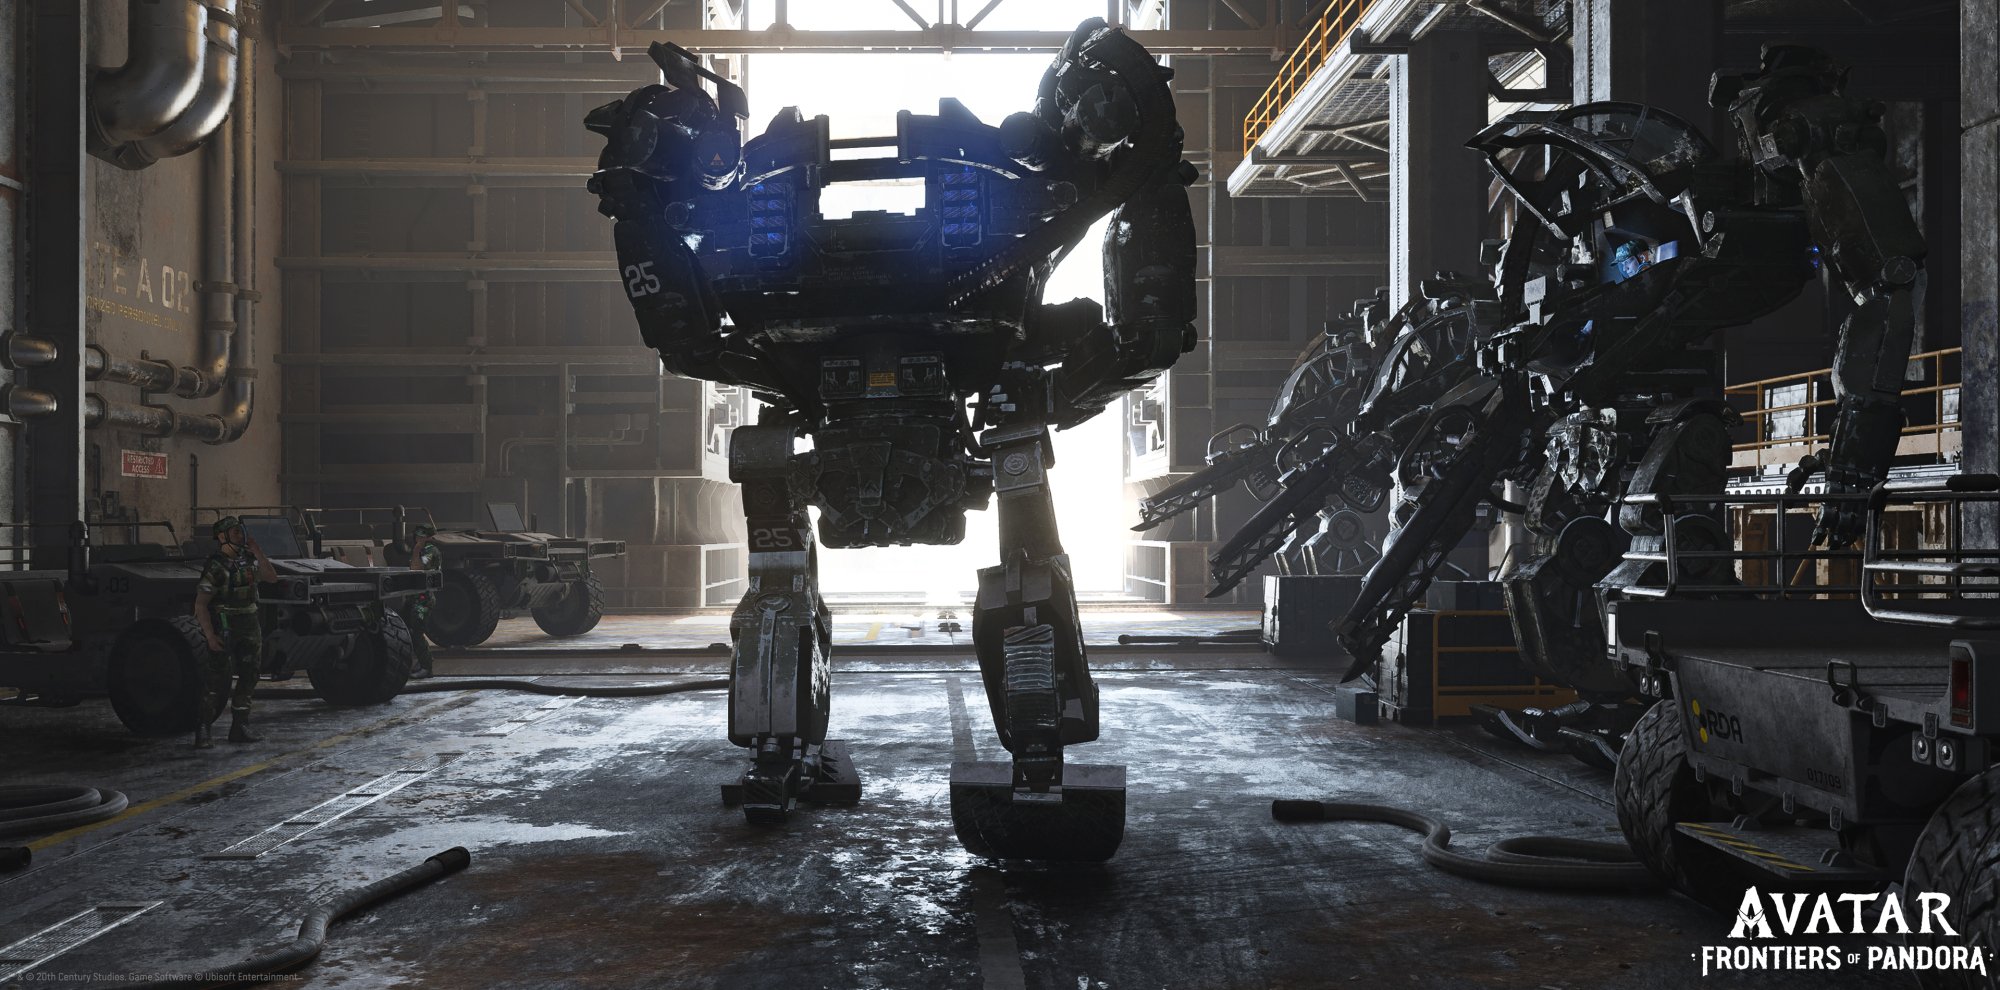 A hanger of AMP, giant walking exoskeletons that serves as enemies in the game